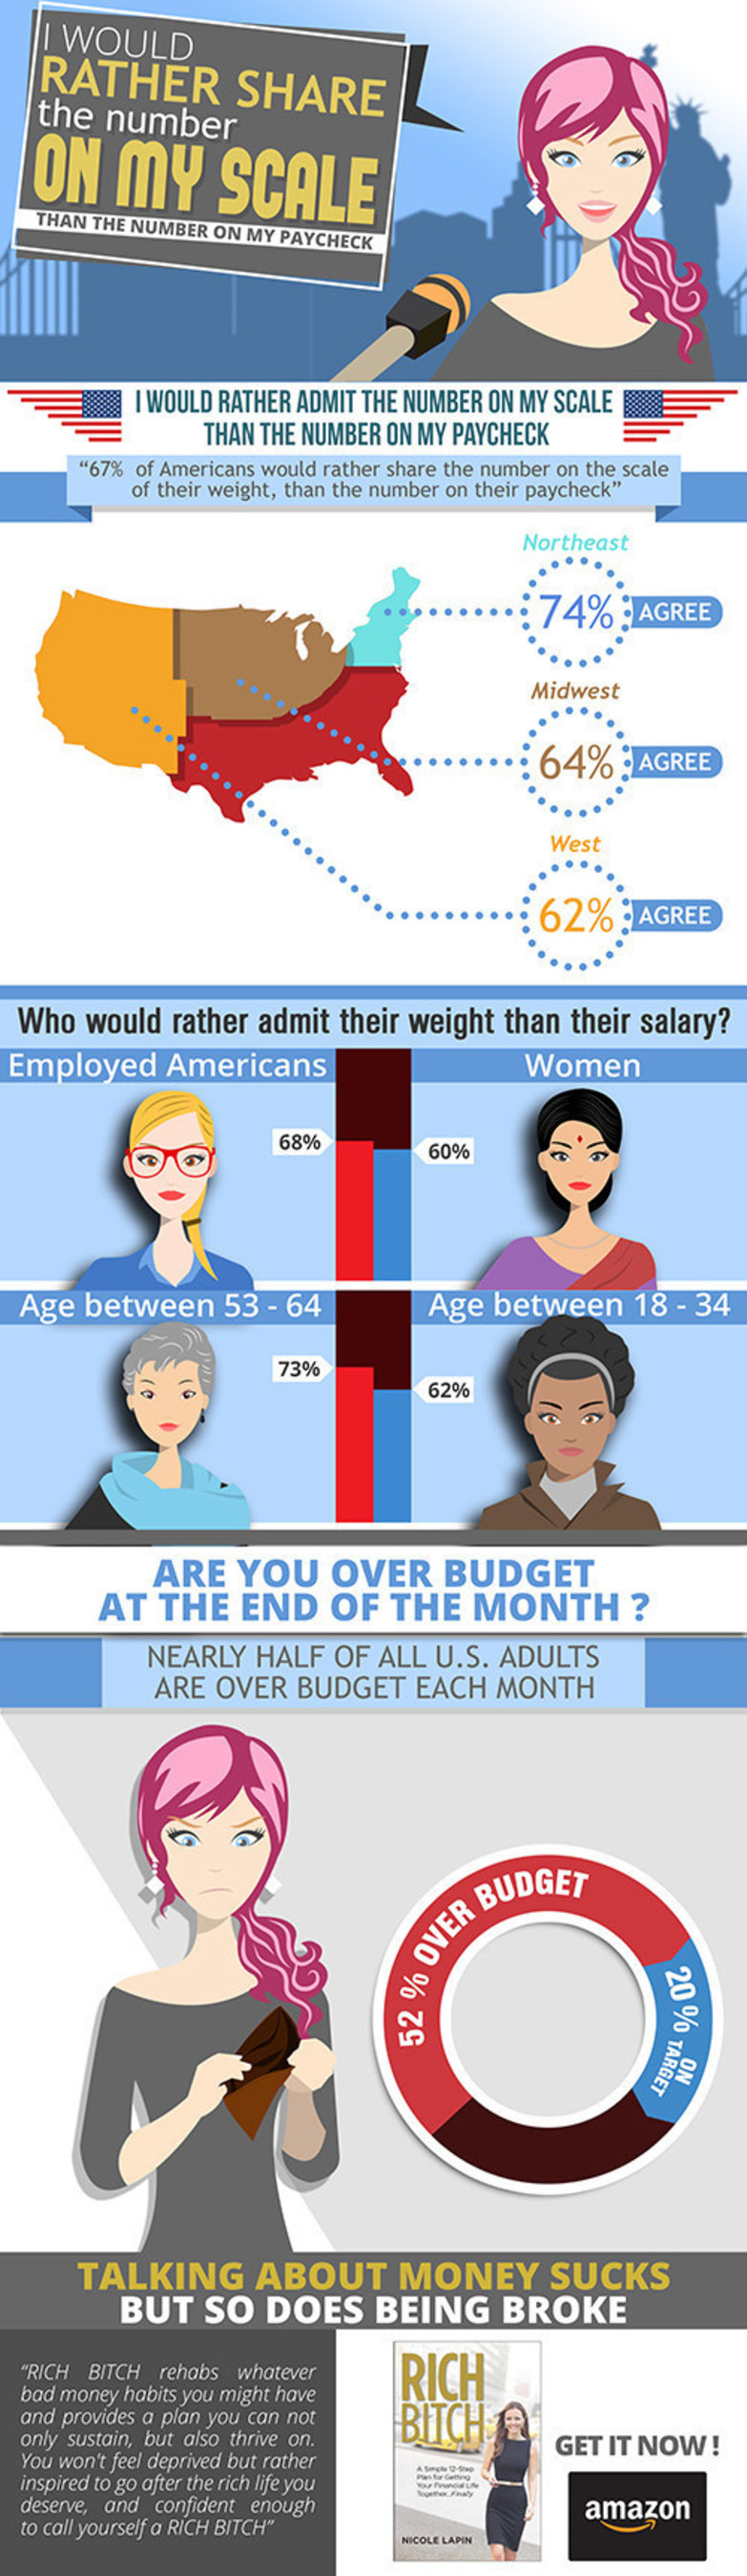 Infographic based on Nicole Lapin's financial survey in partnership with Nielsen. The survey was conducted between Dec 1-3, 2014 and polled the general population.